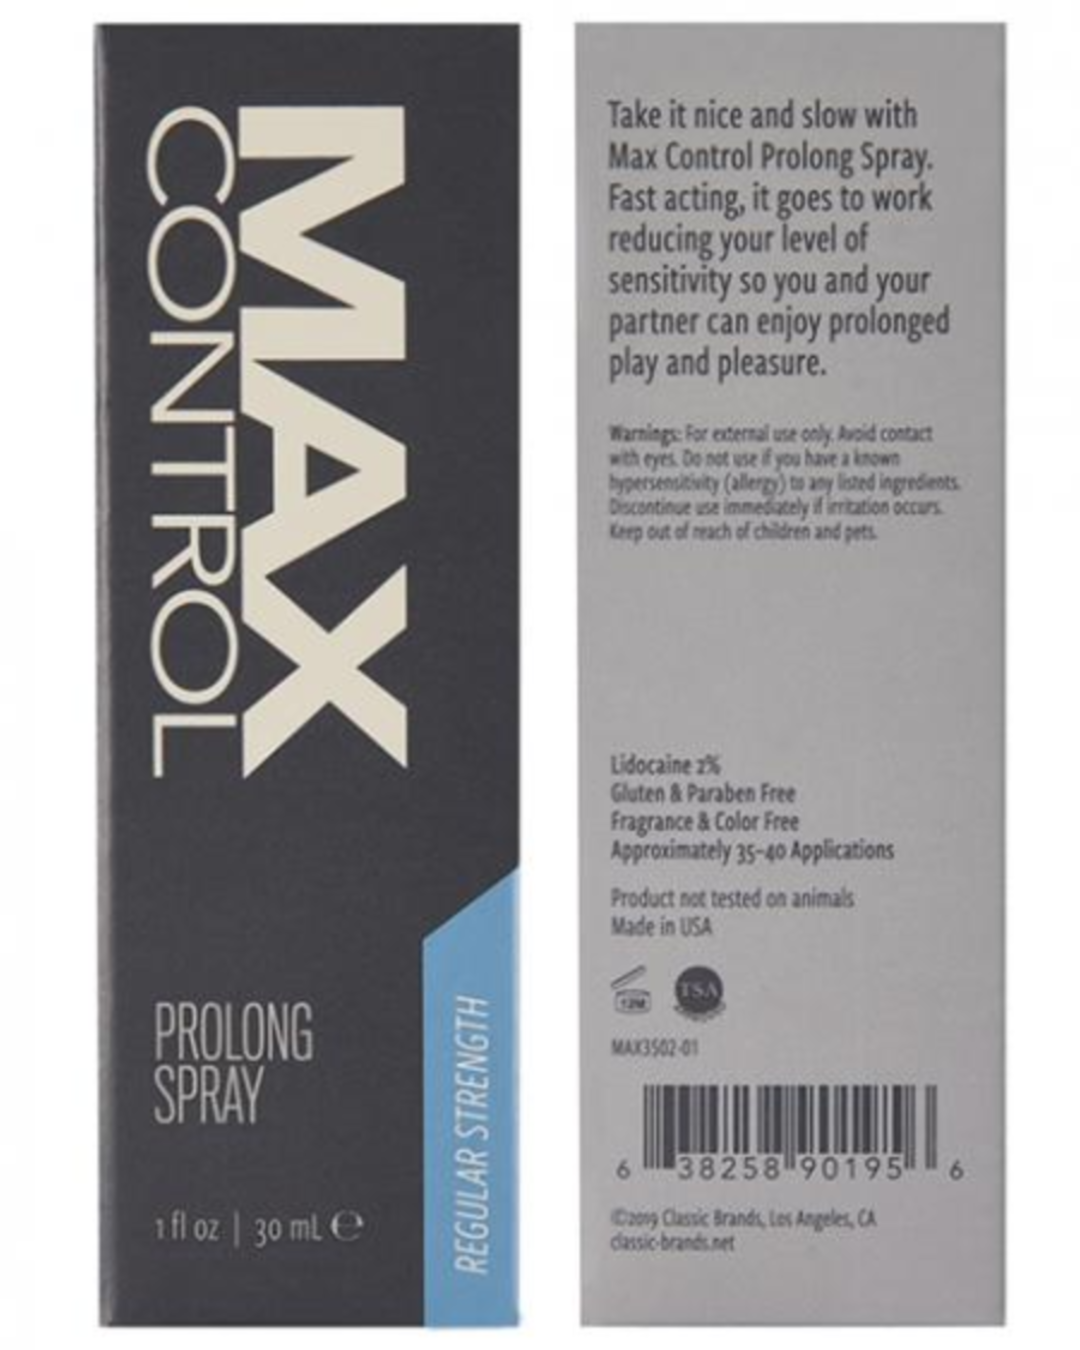 Max Control Prolong Spray Regular Strength - 1oz front and back of product box 